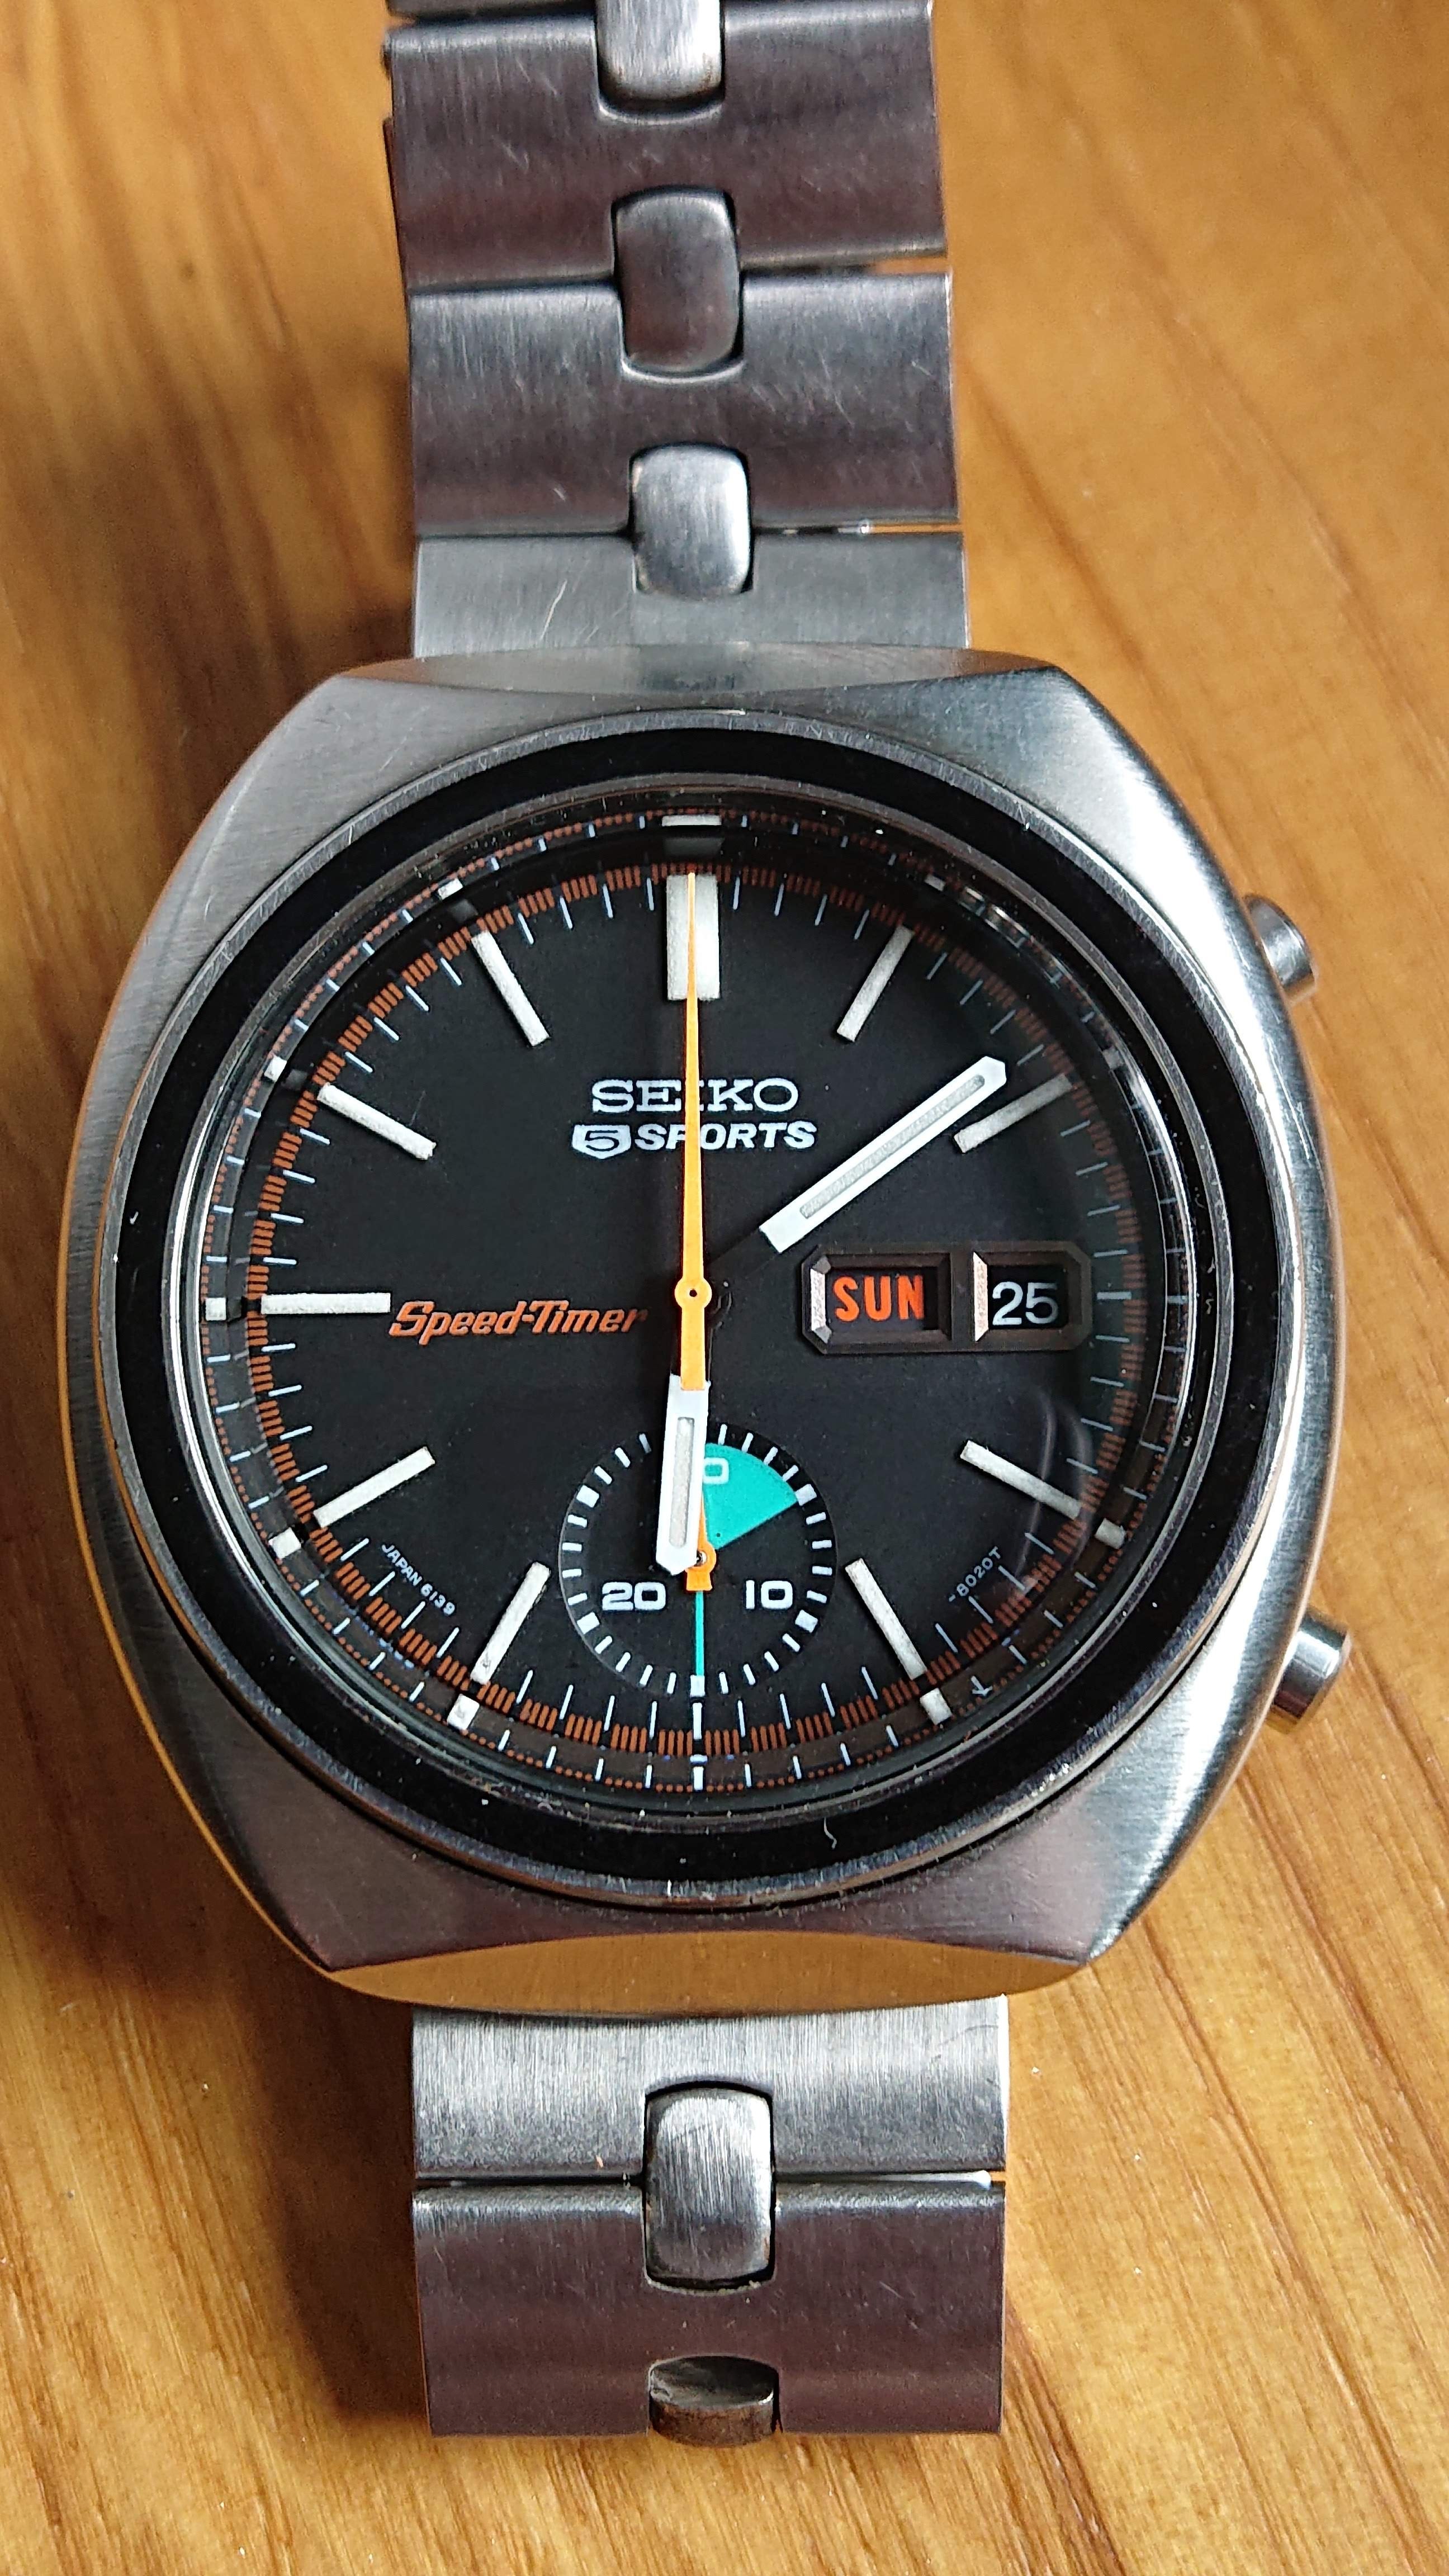 For Sale - Seiko 6139-8002 Chronograph, 650 EUR | The Watch Site